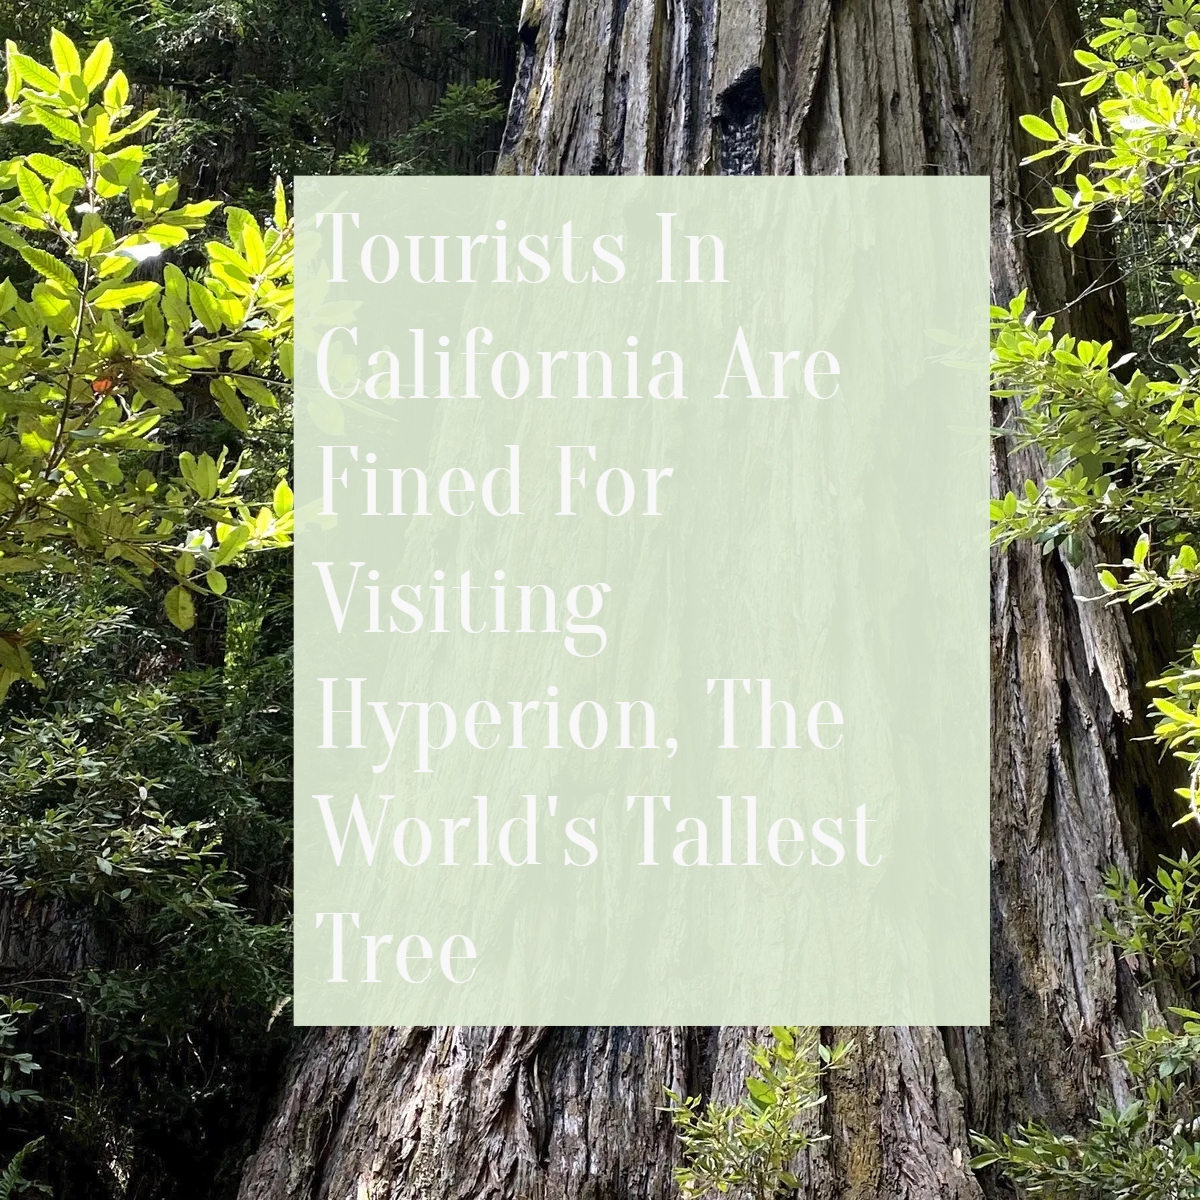 Tourists In California Are Fined For Visiting Hyperion, The World's Tallest Tree